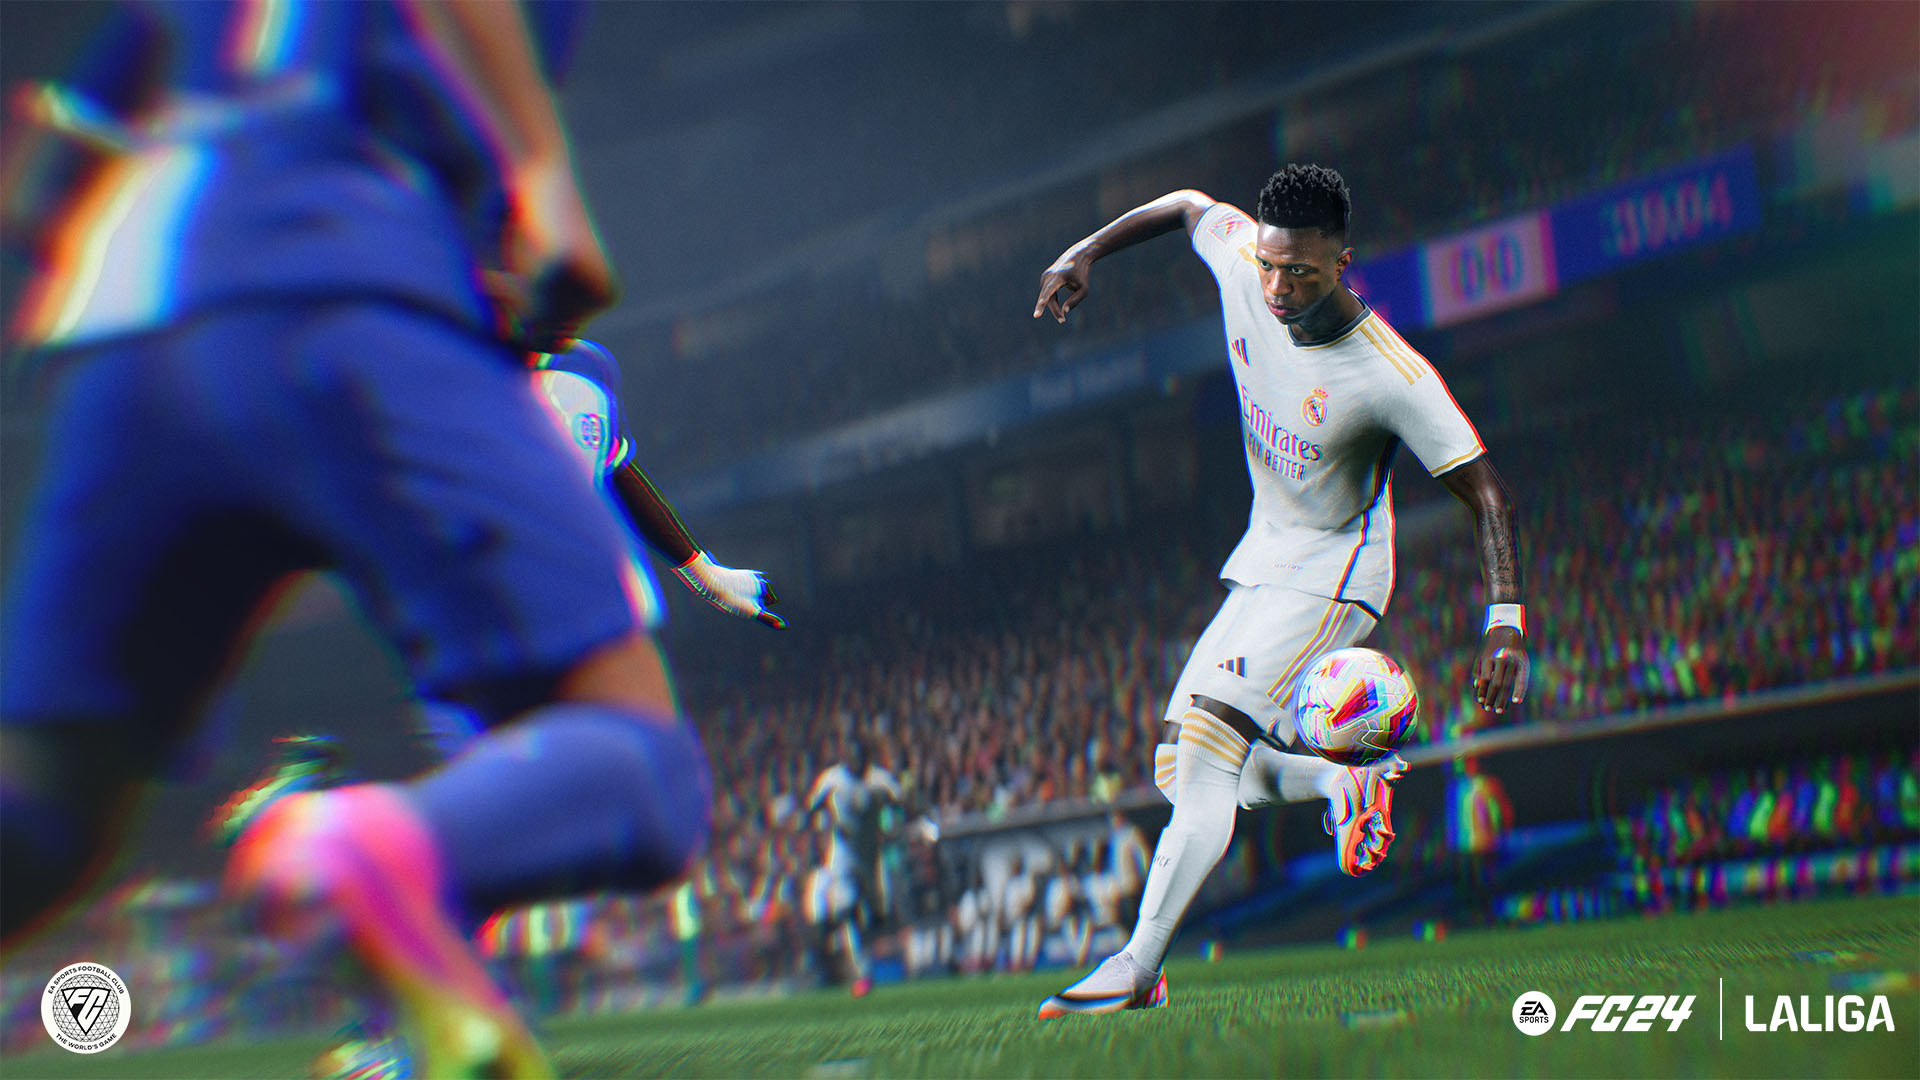 Here's where to buy EA Sports FC 24